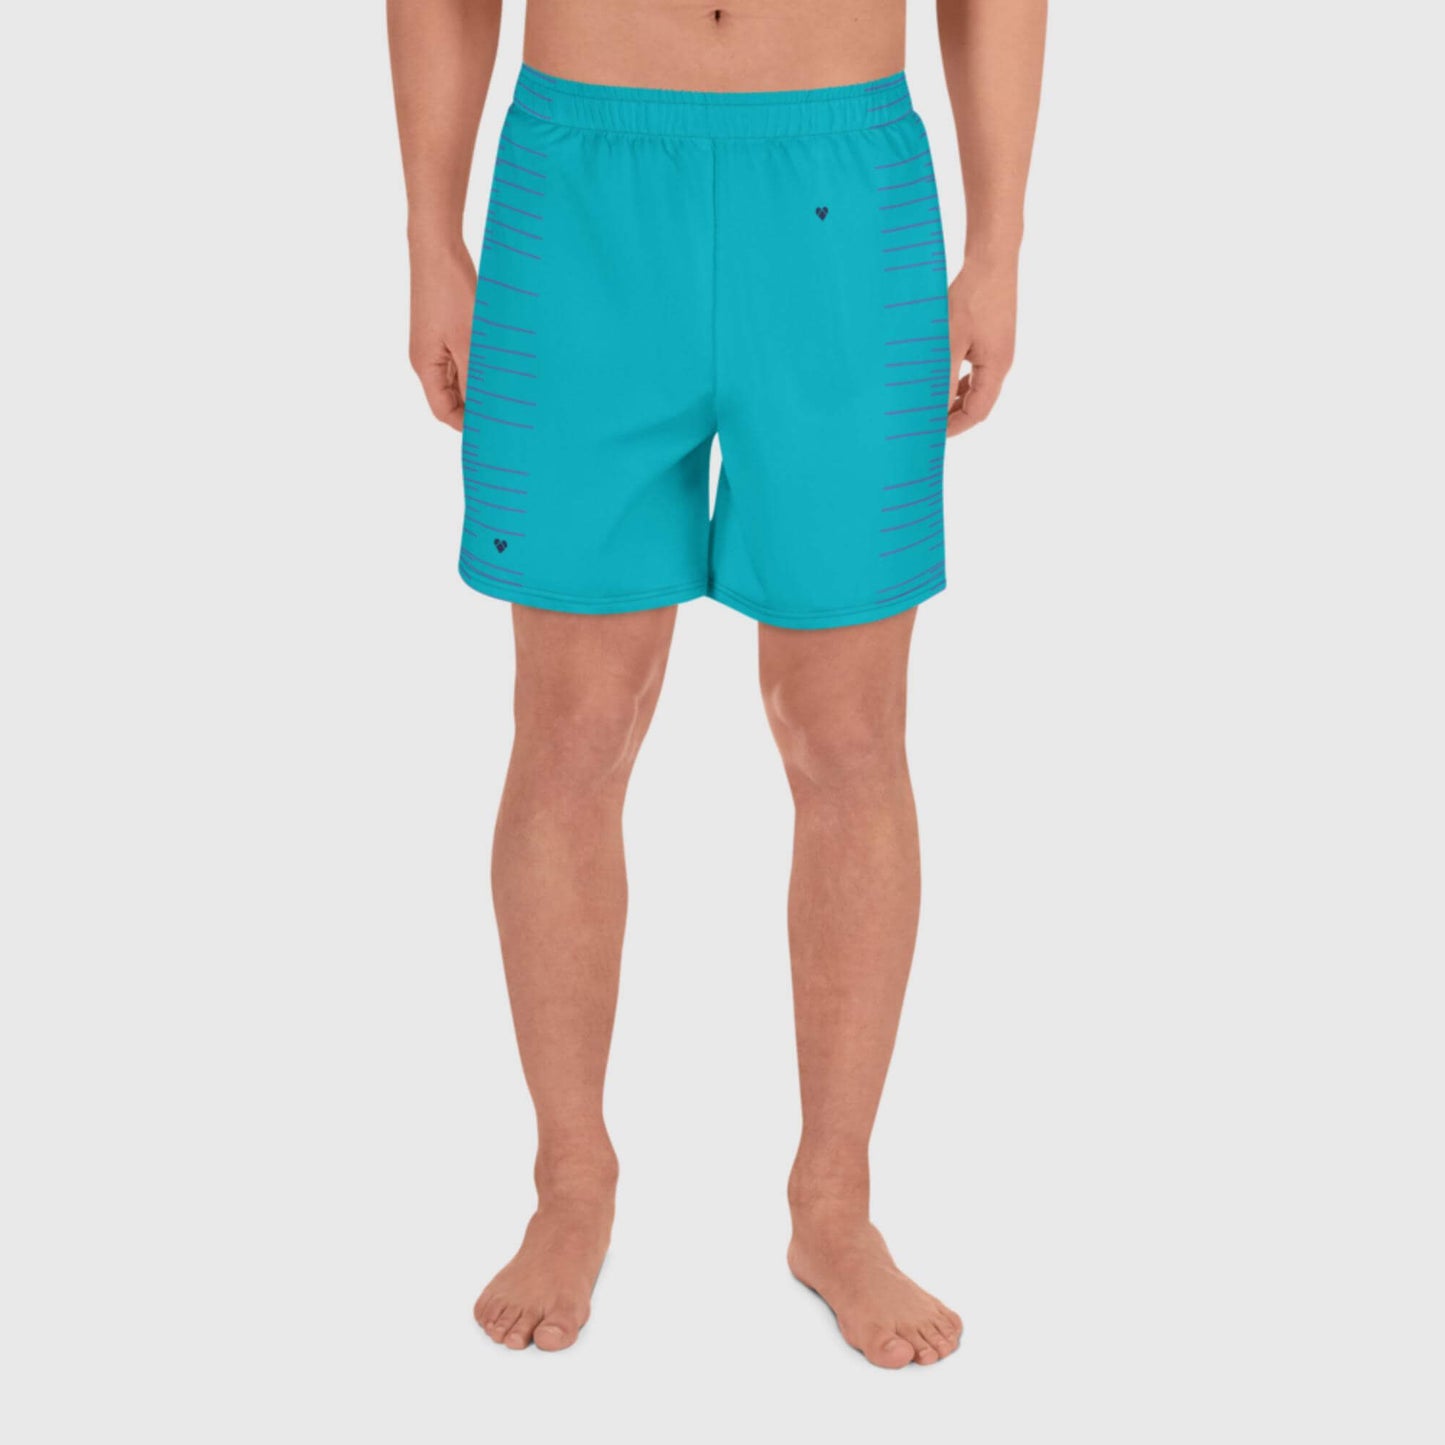 Dynamic movement with CRiZ AMOR's Turquoise Dual Sport Shorts for men